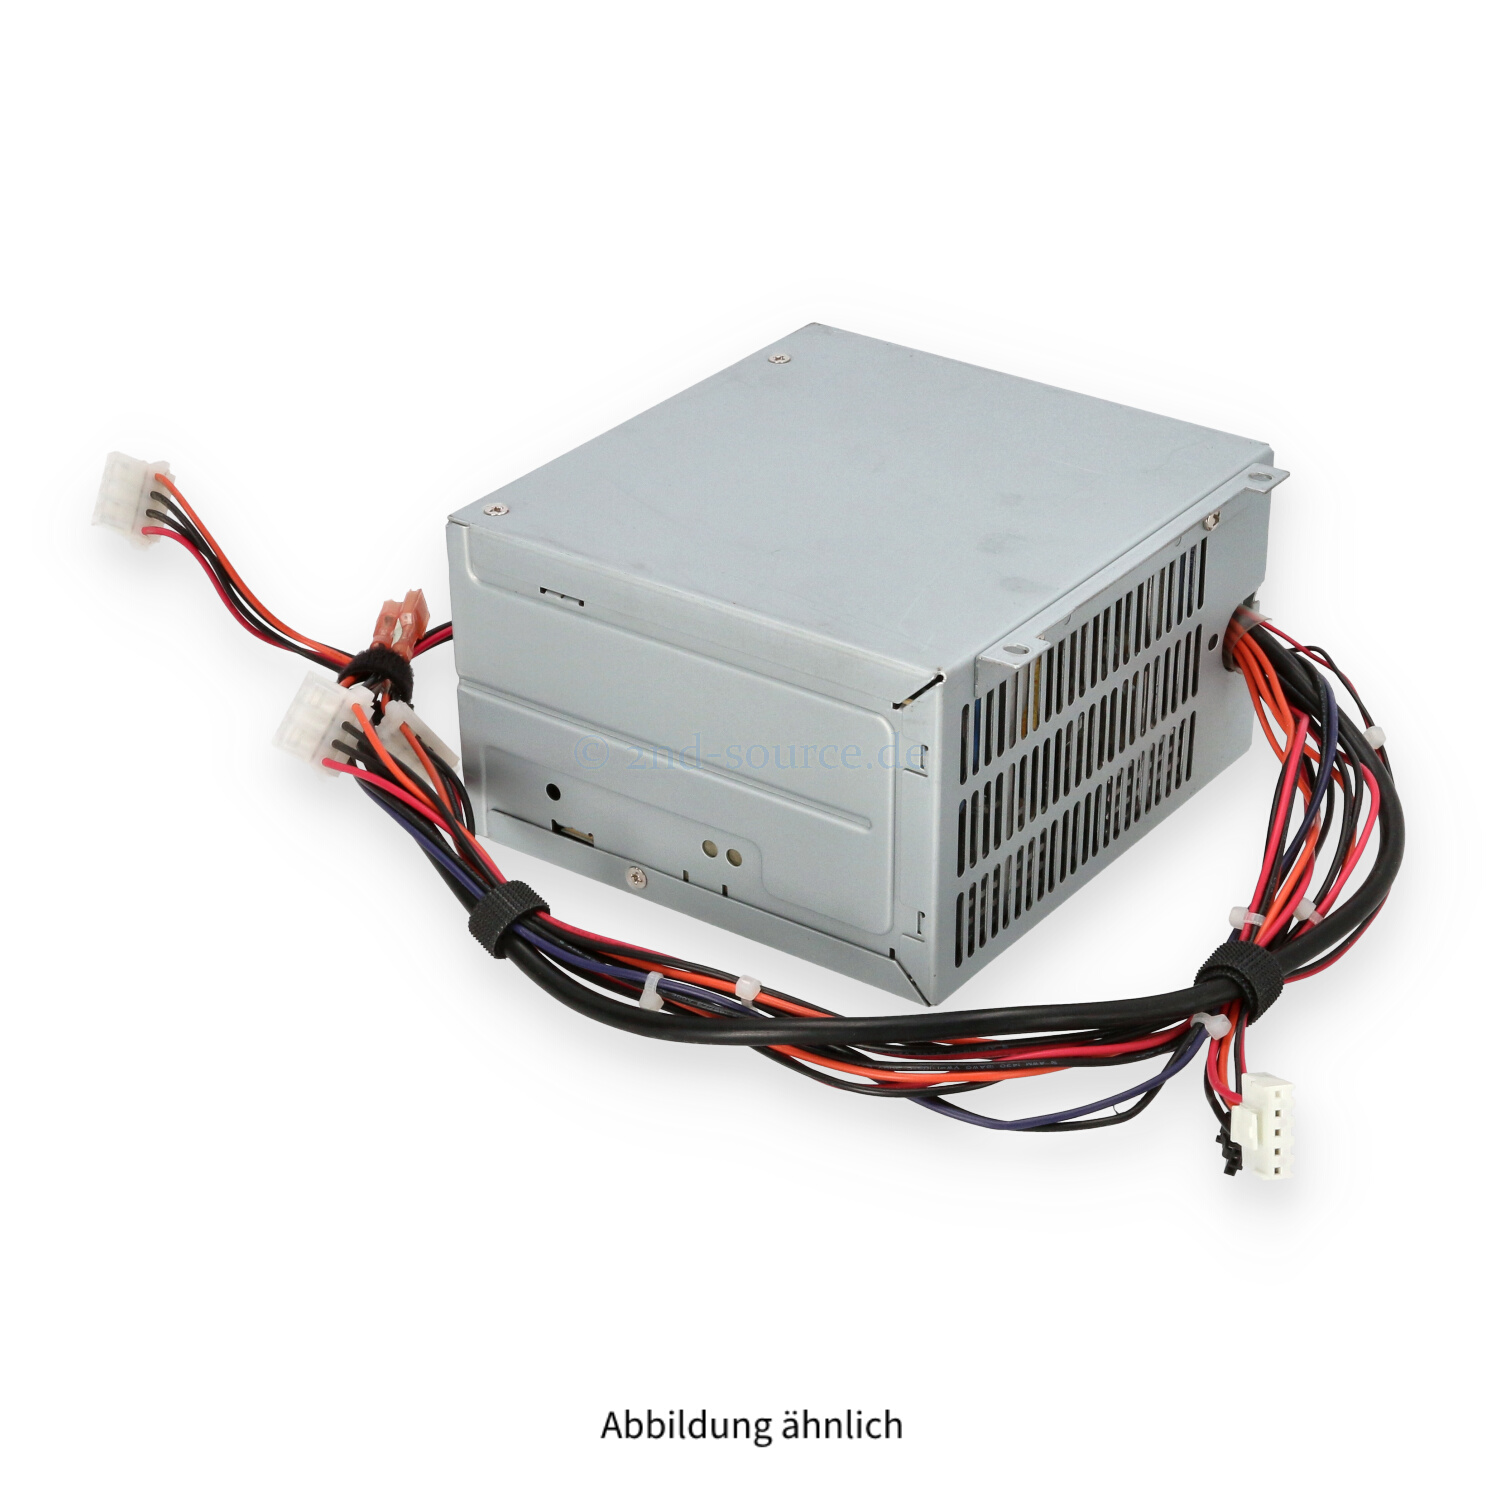 HPE 195W Power Supply DPS-200PB-129 A 406402-001